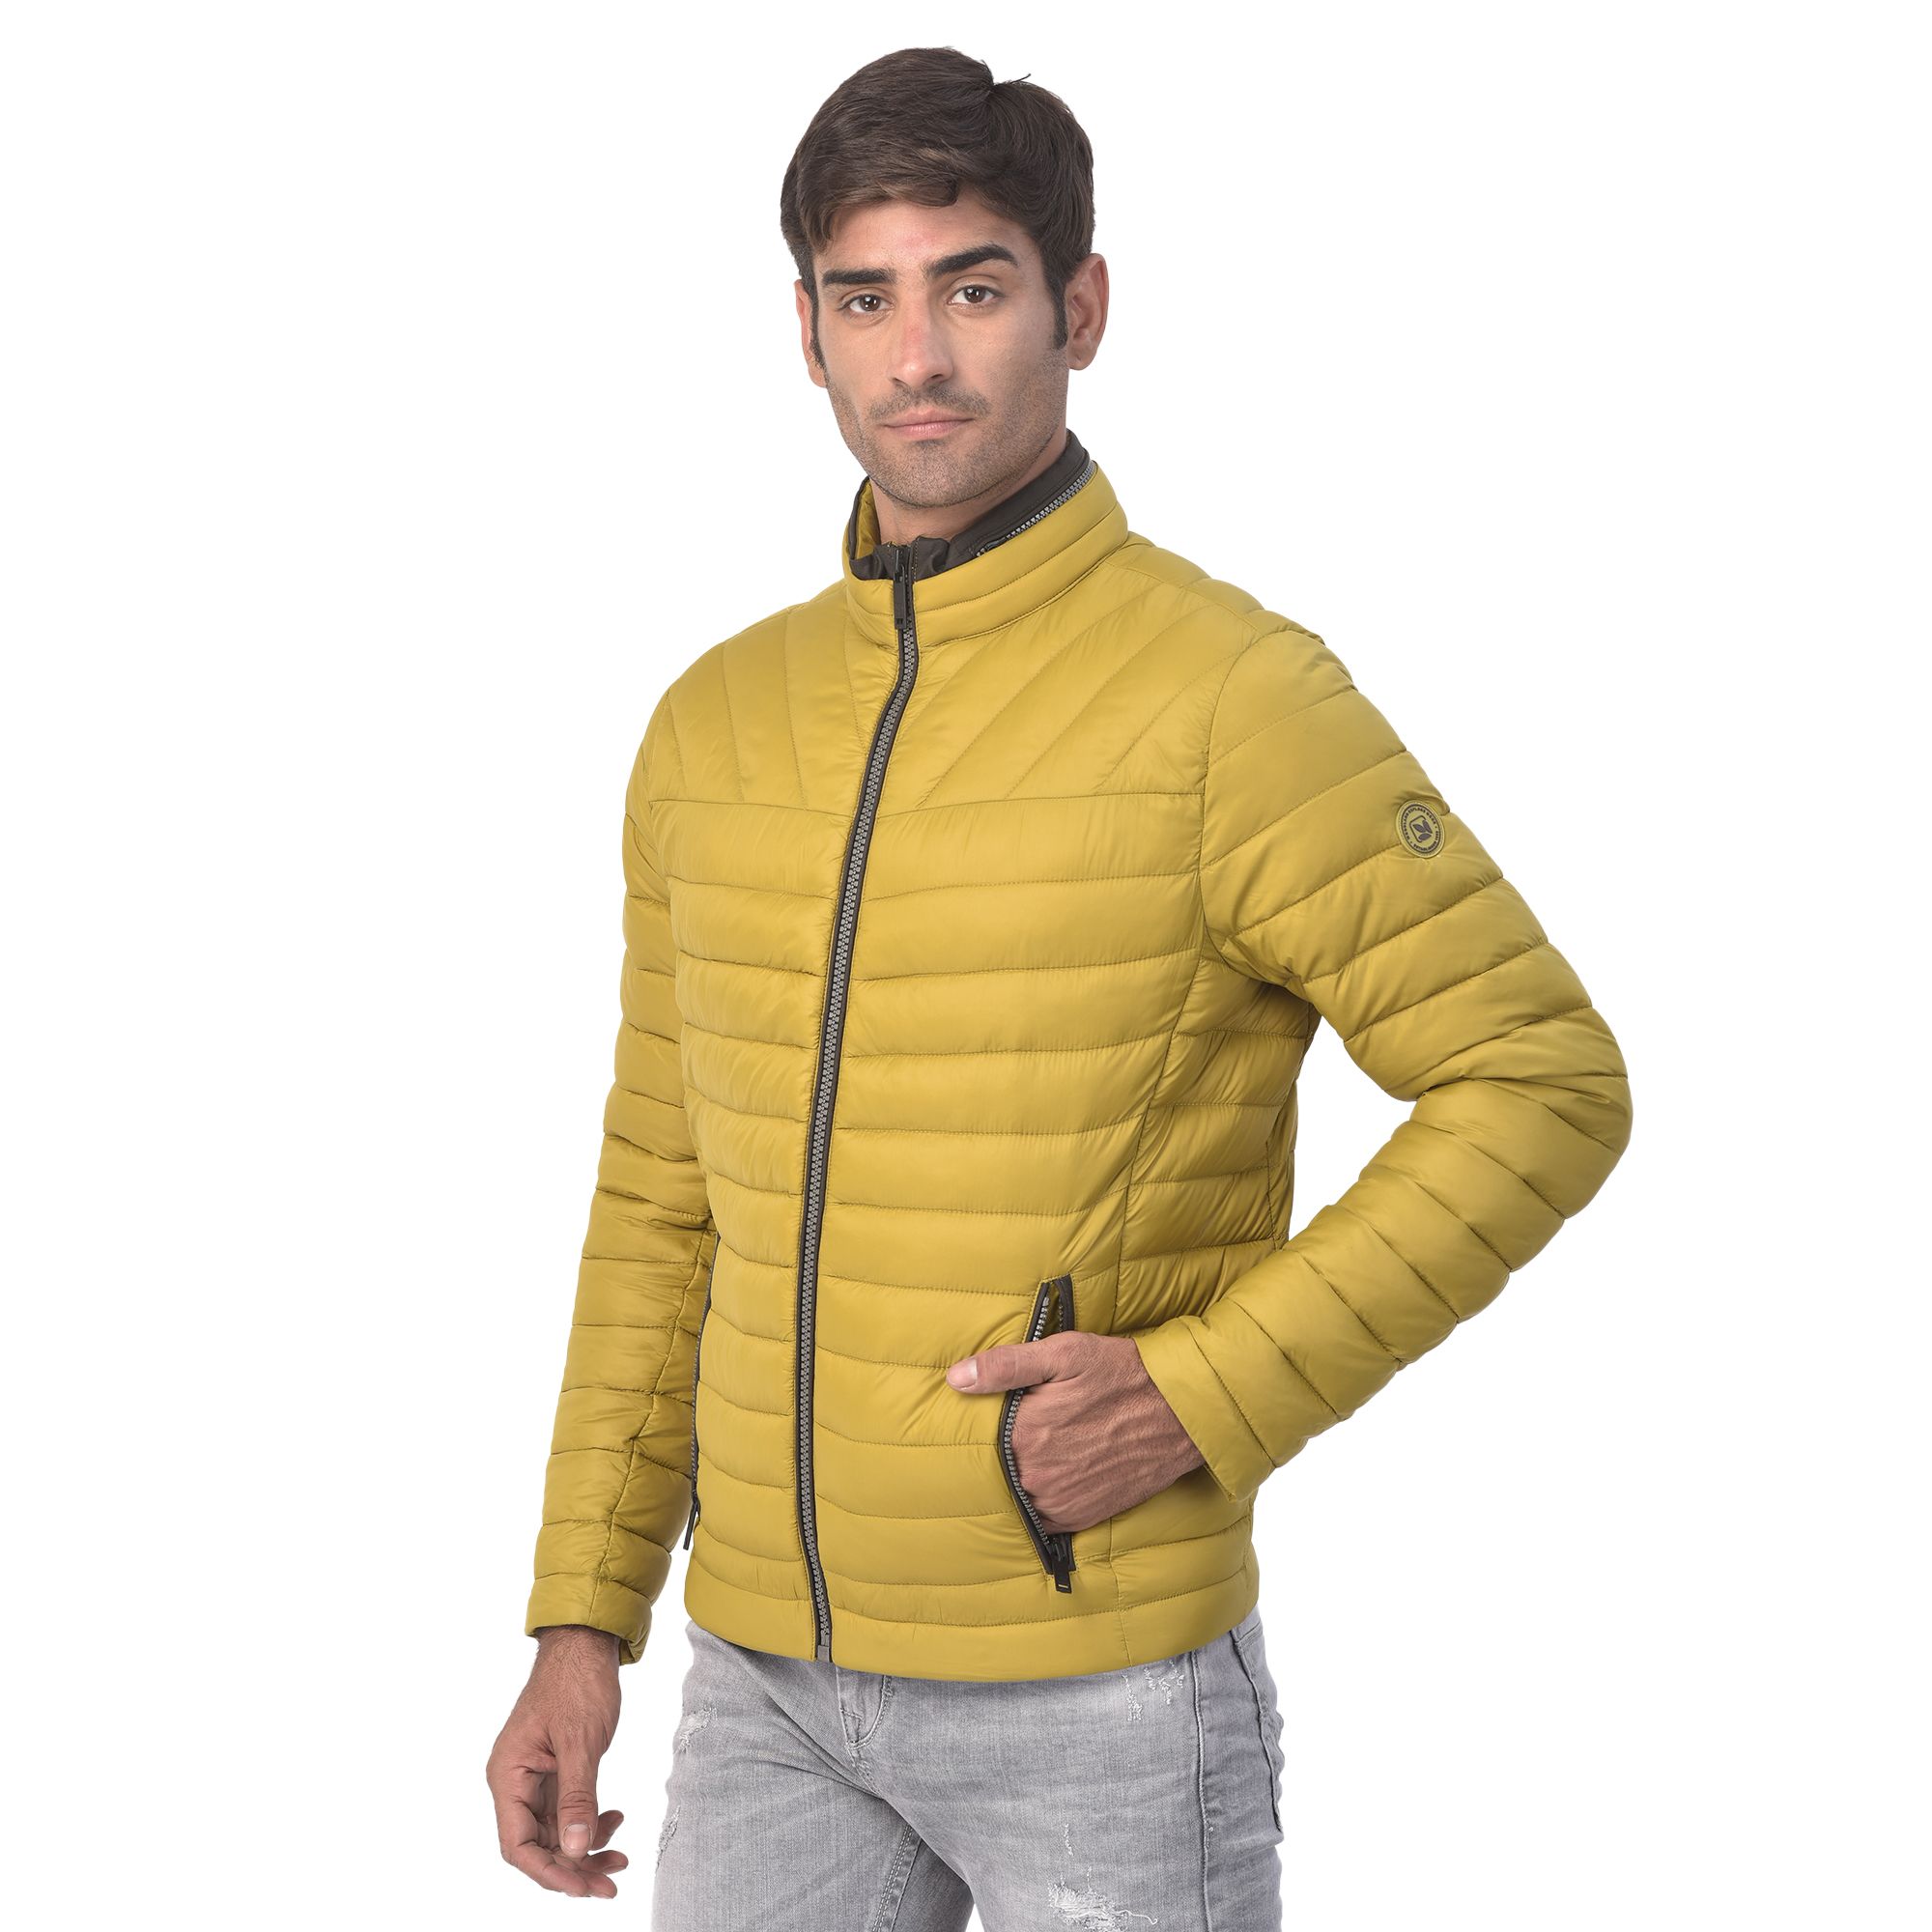 Golden palm quilted jacket